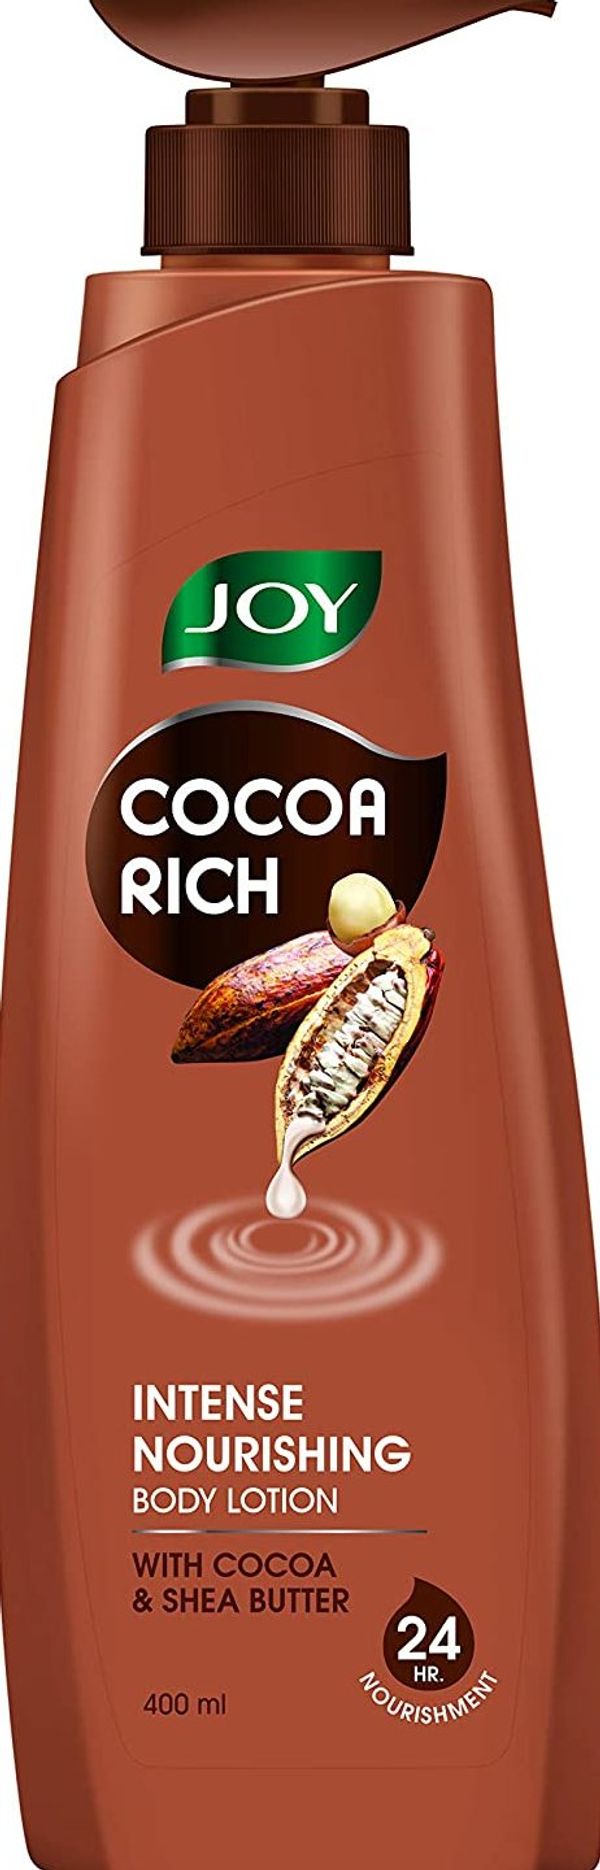 Joy Cocoa Rich Intense Nourishing Body Lotion with Shea Butter, For All Skin Types 400 ml